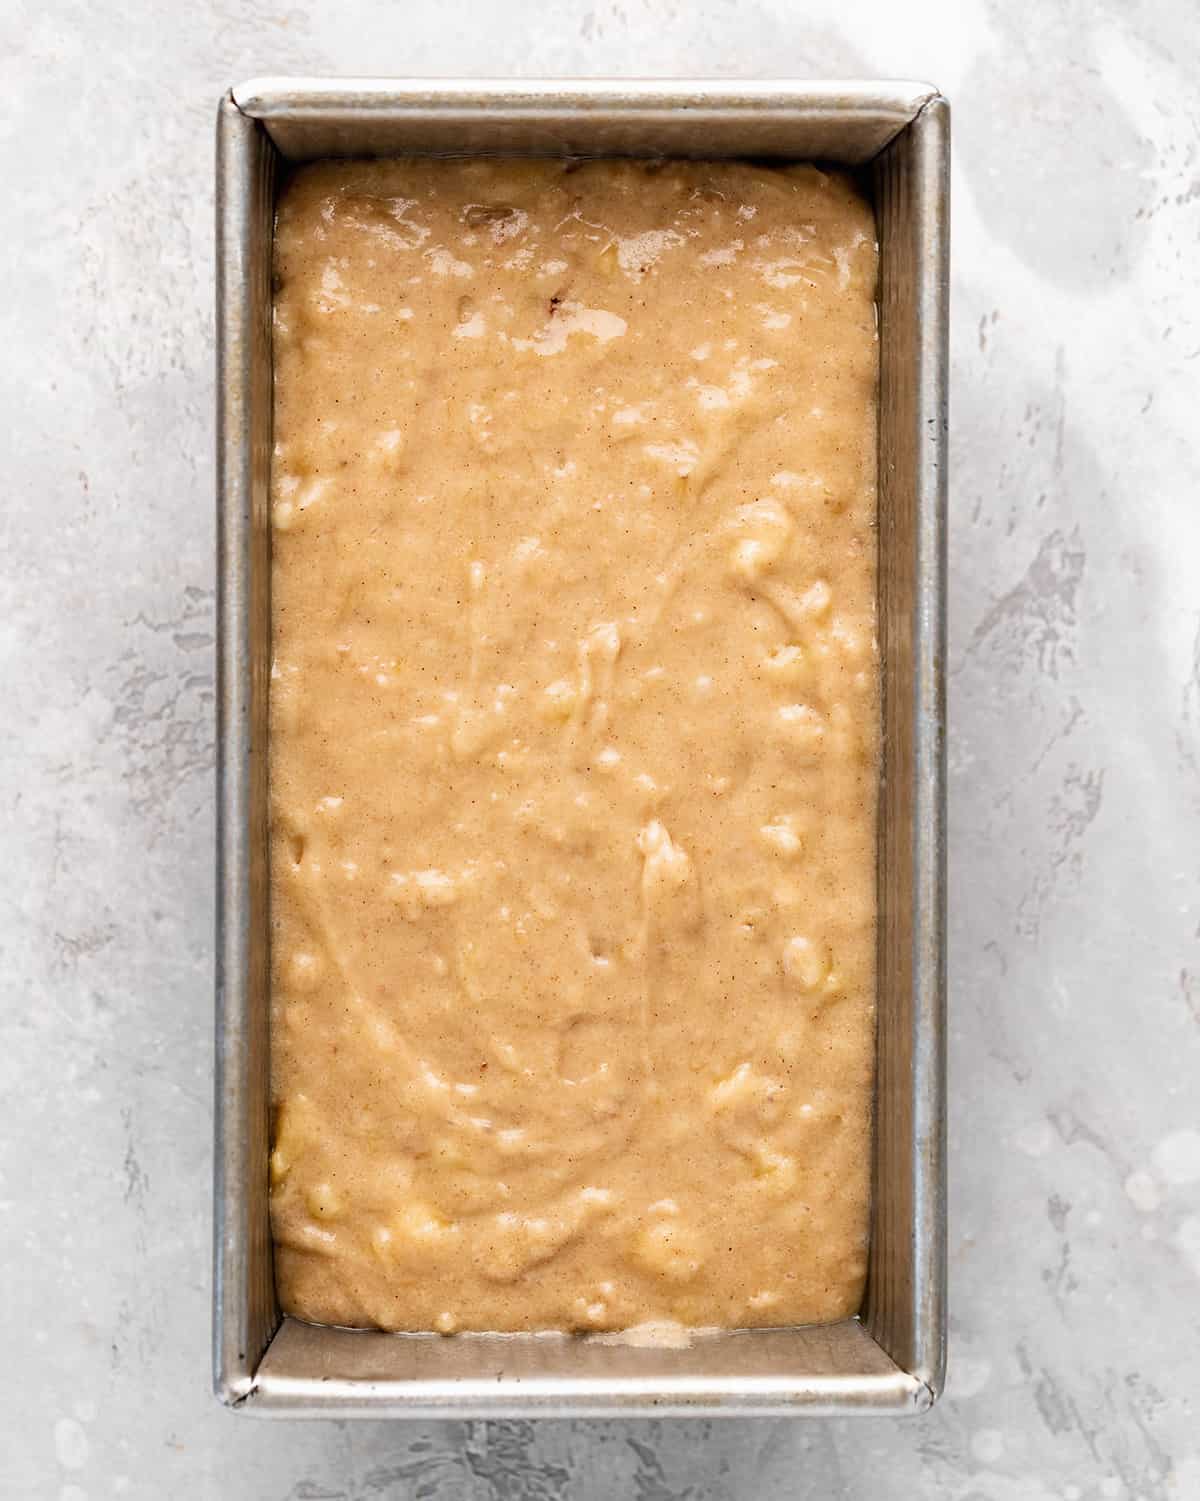 banana bread batter in a loaf pan before baking